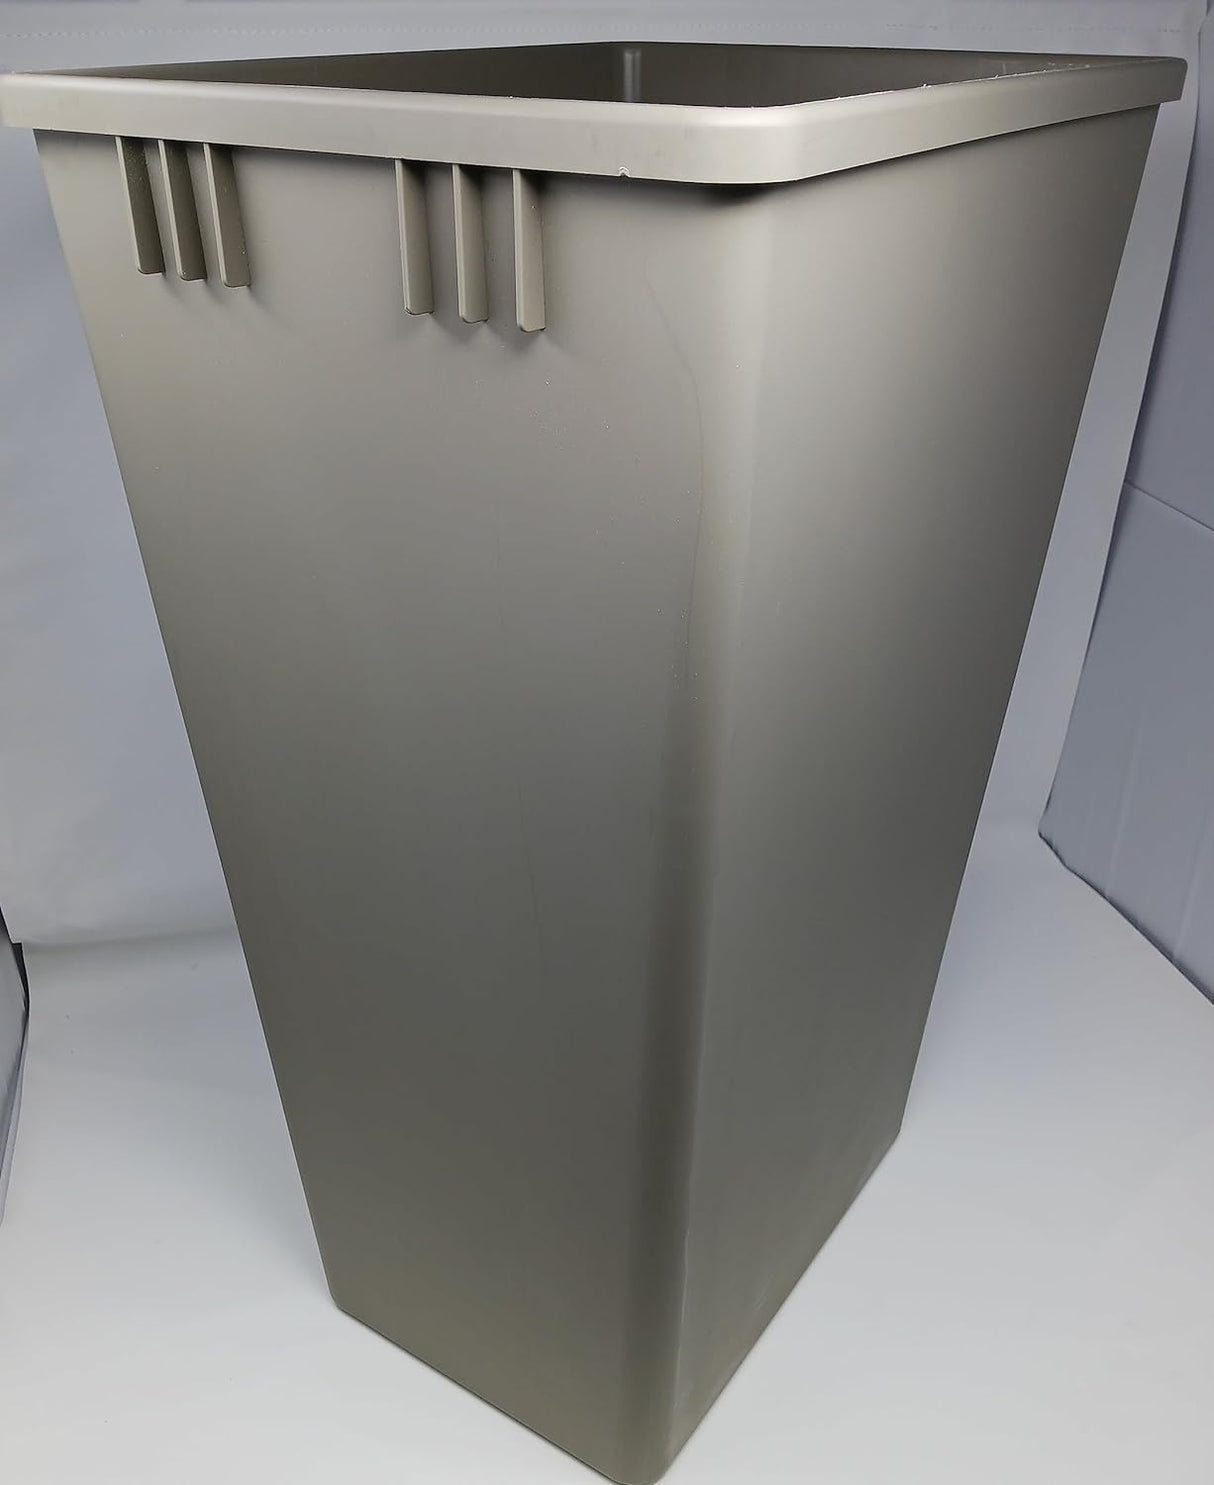 Kesseböhmer 36Qt.(34 Liters) or 52Qt.(49 Liters) Replacement Waste Bin for Cabinet Recycling Pull Out Trash Organizer